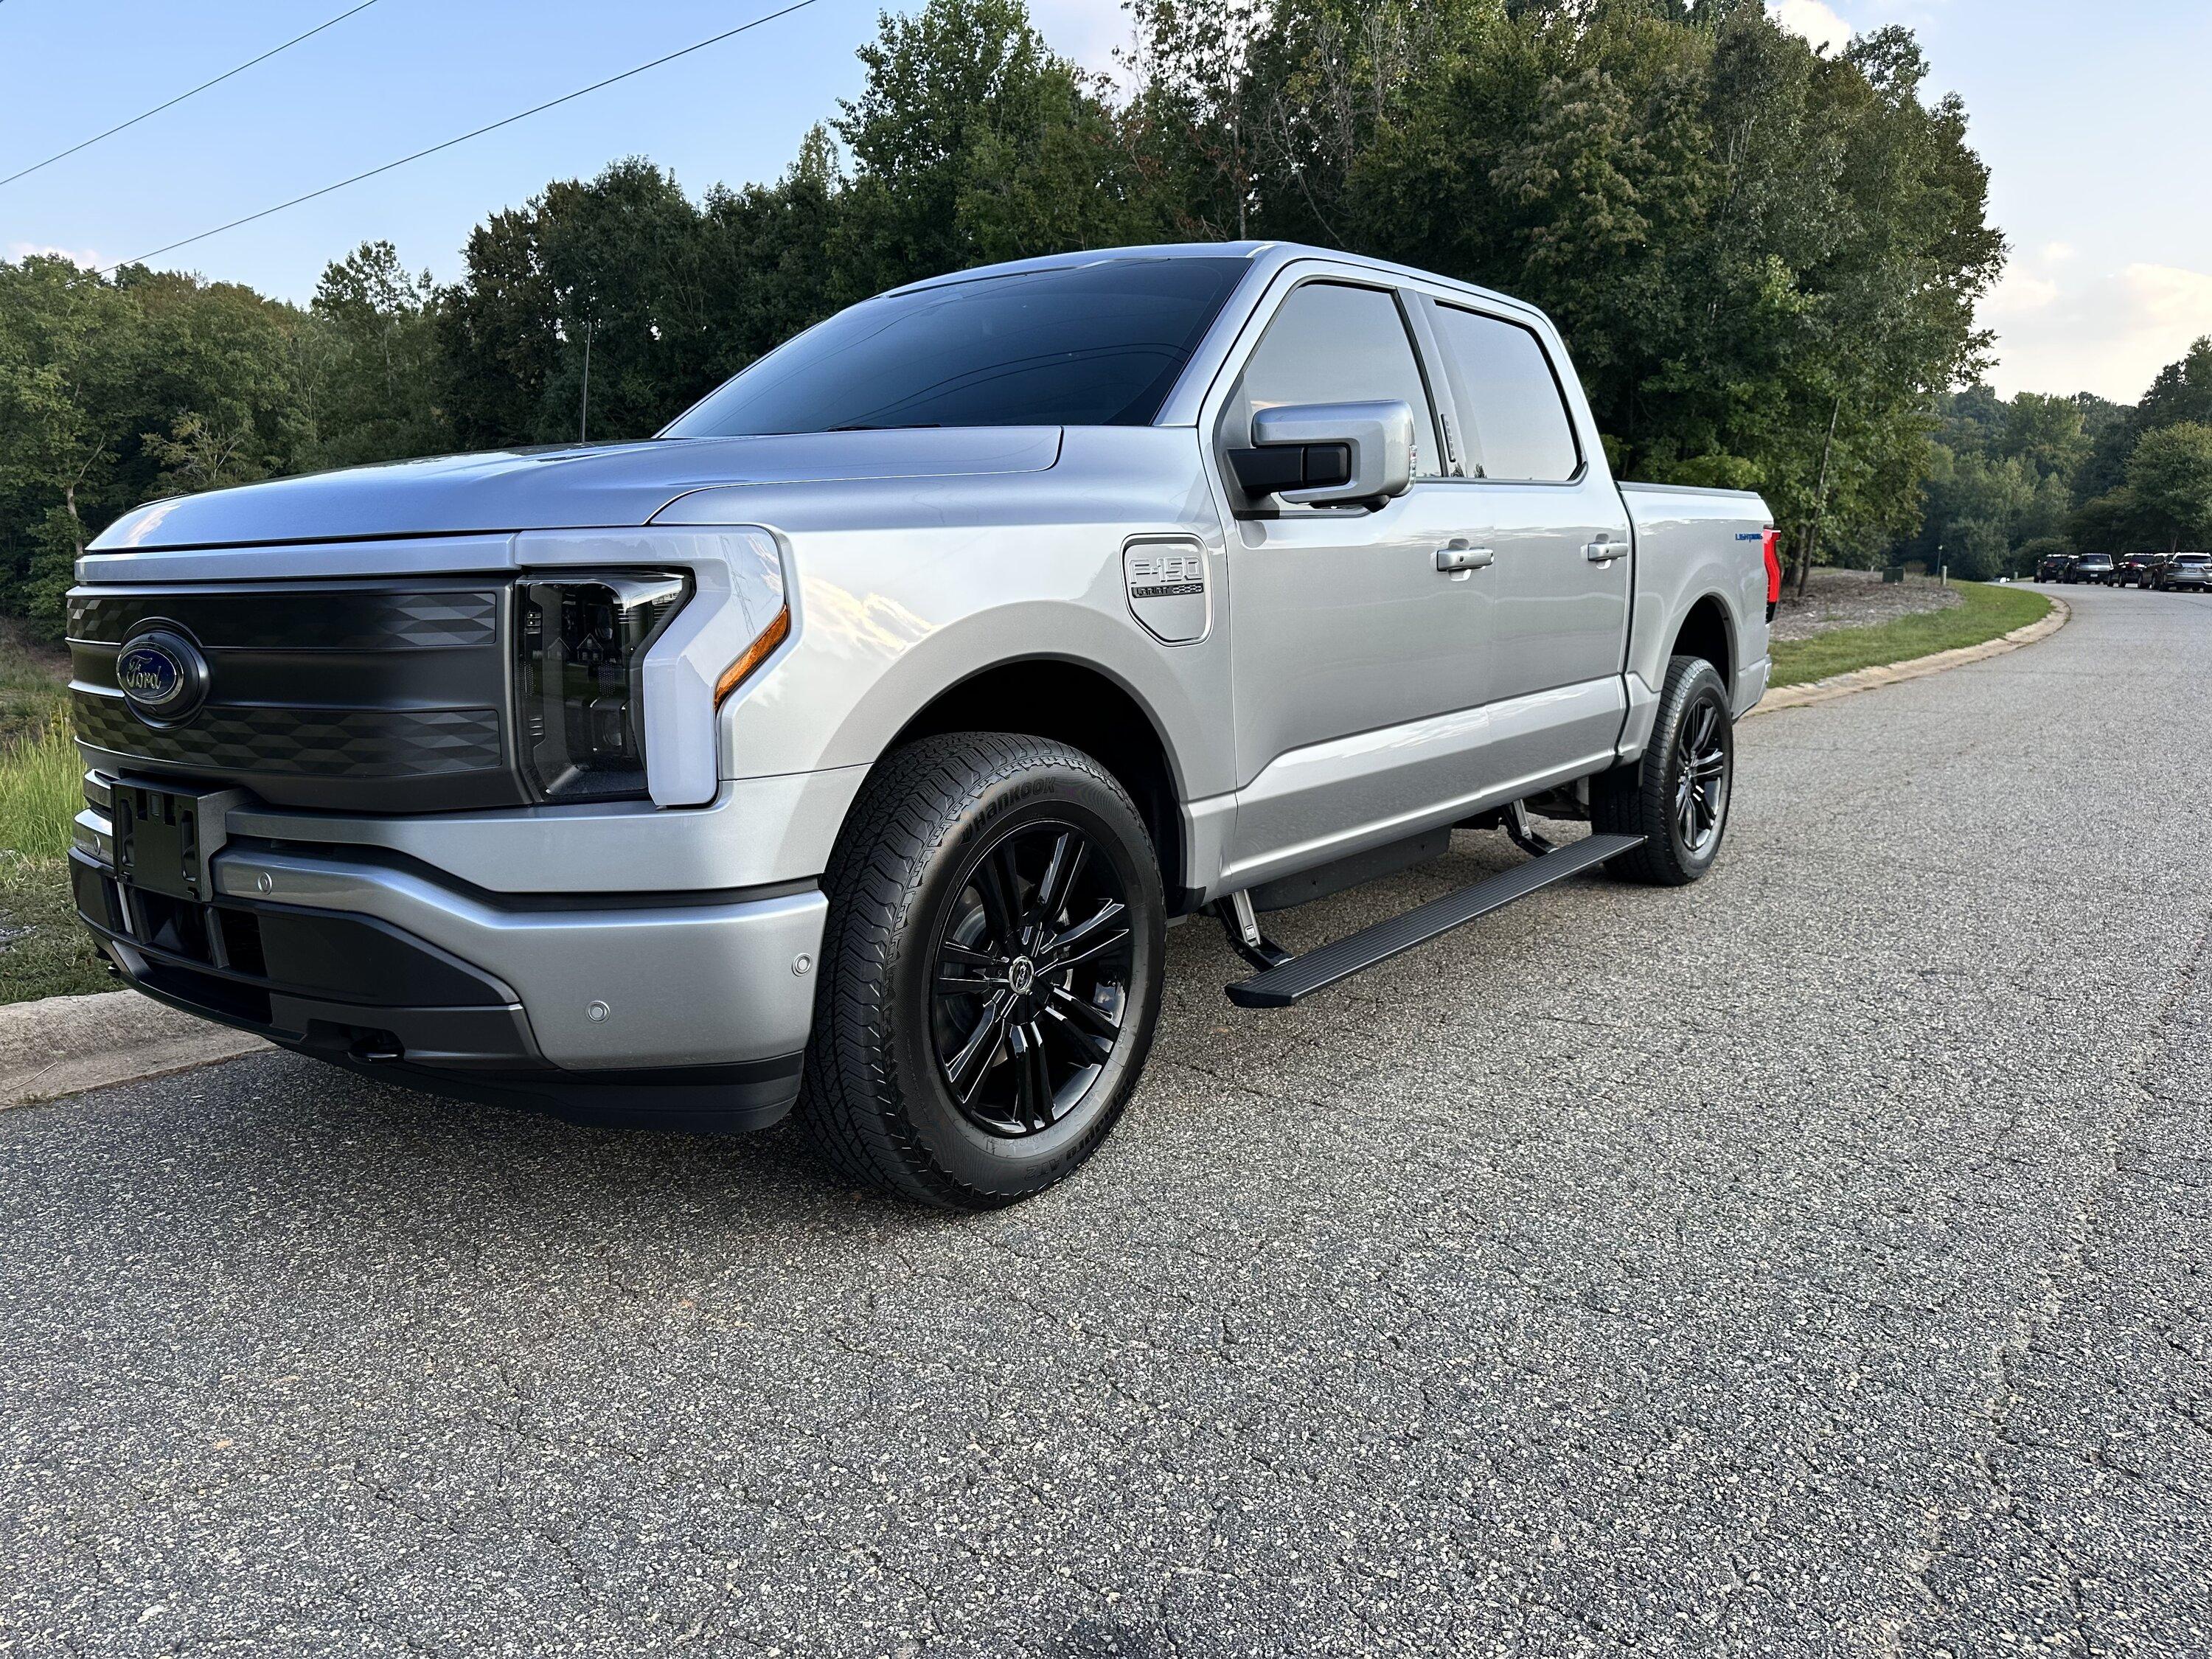 Ford F-150 Lightning Gloss black 20" wheels on my Lightning Lariat with stock AT tires, tints, AMP Power Steps 2255BF35-02AF-4A23-A5C8-53BC9329E0FB